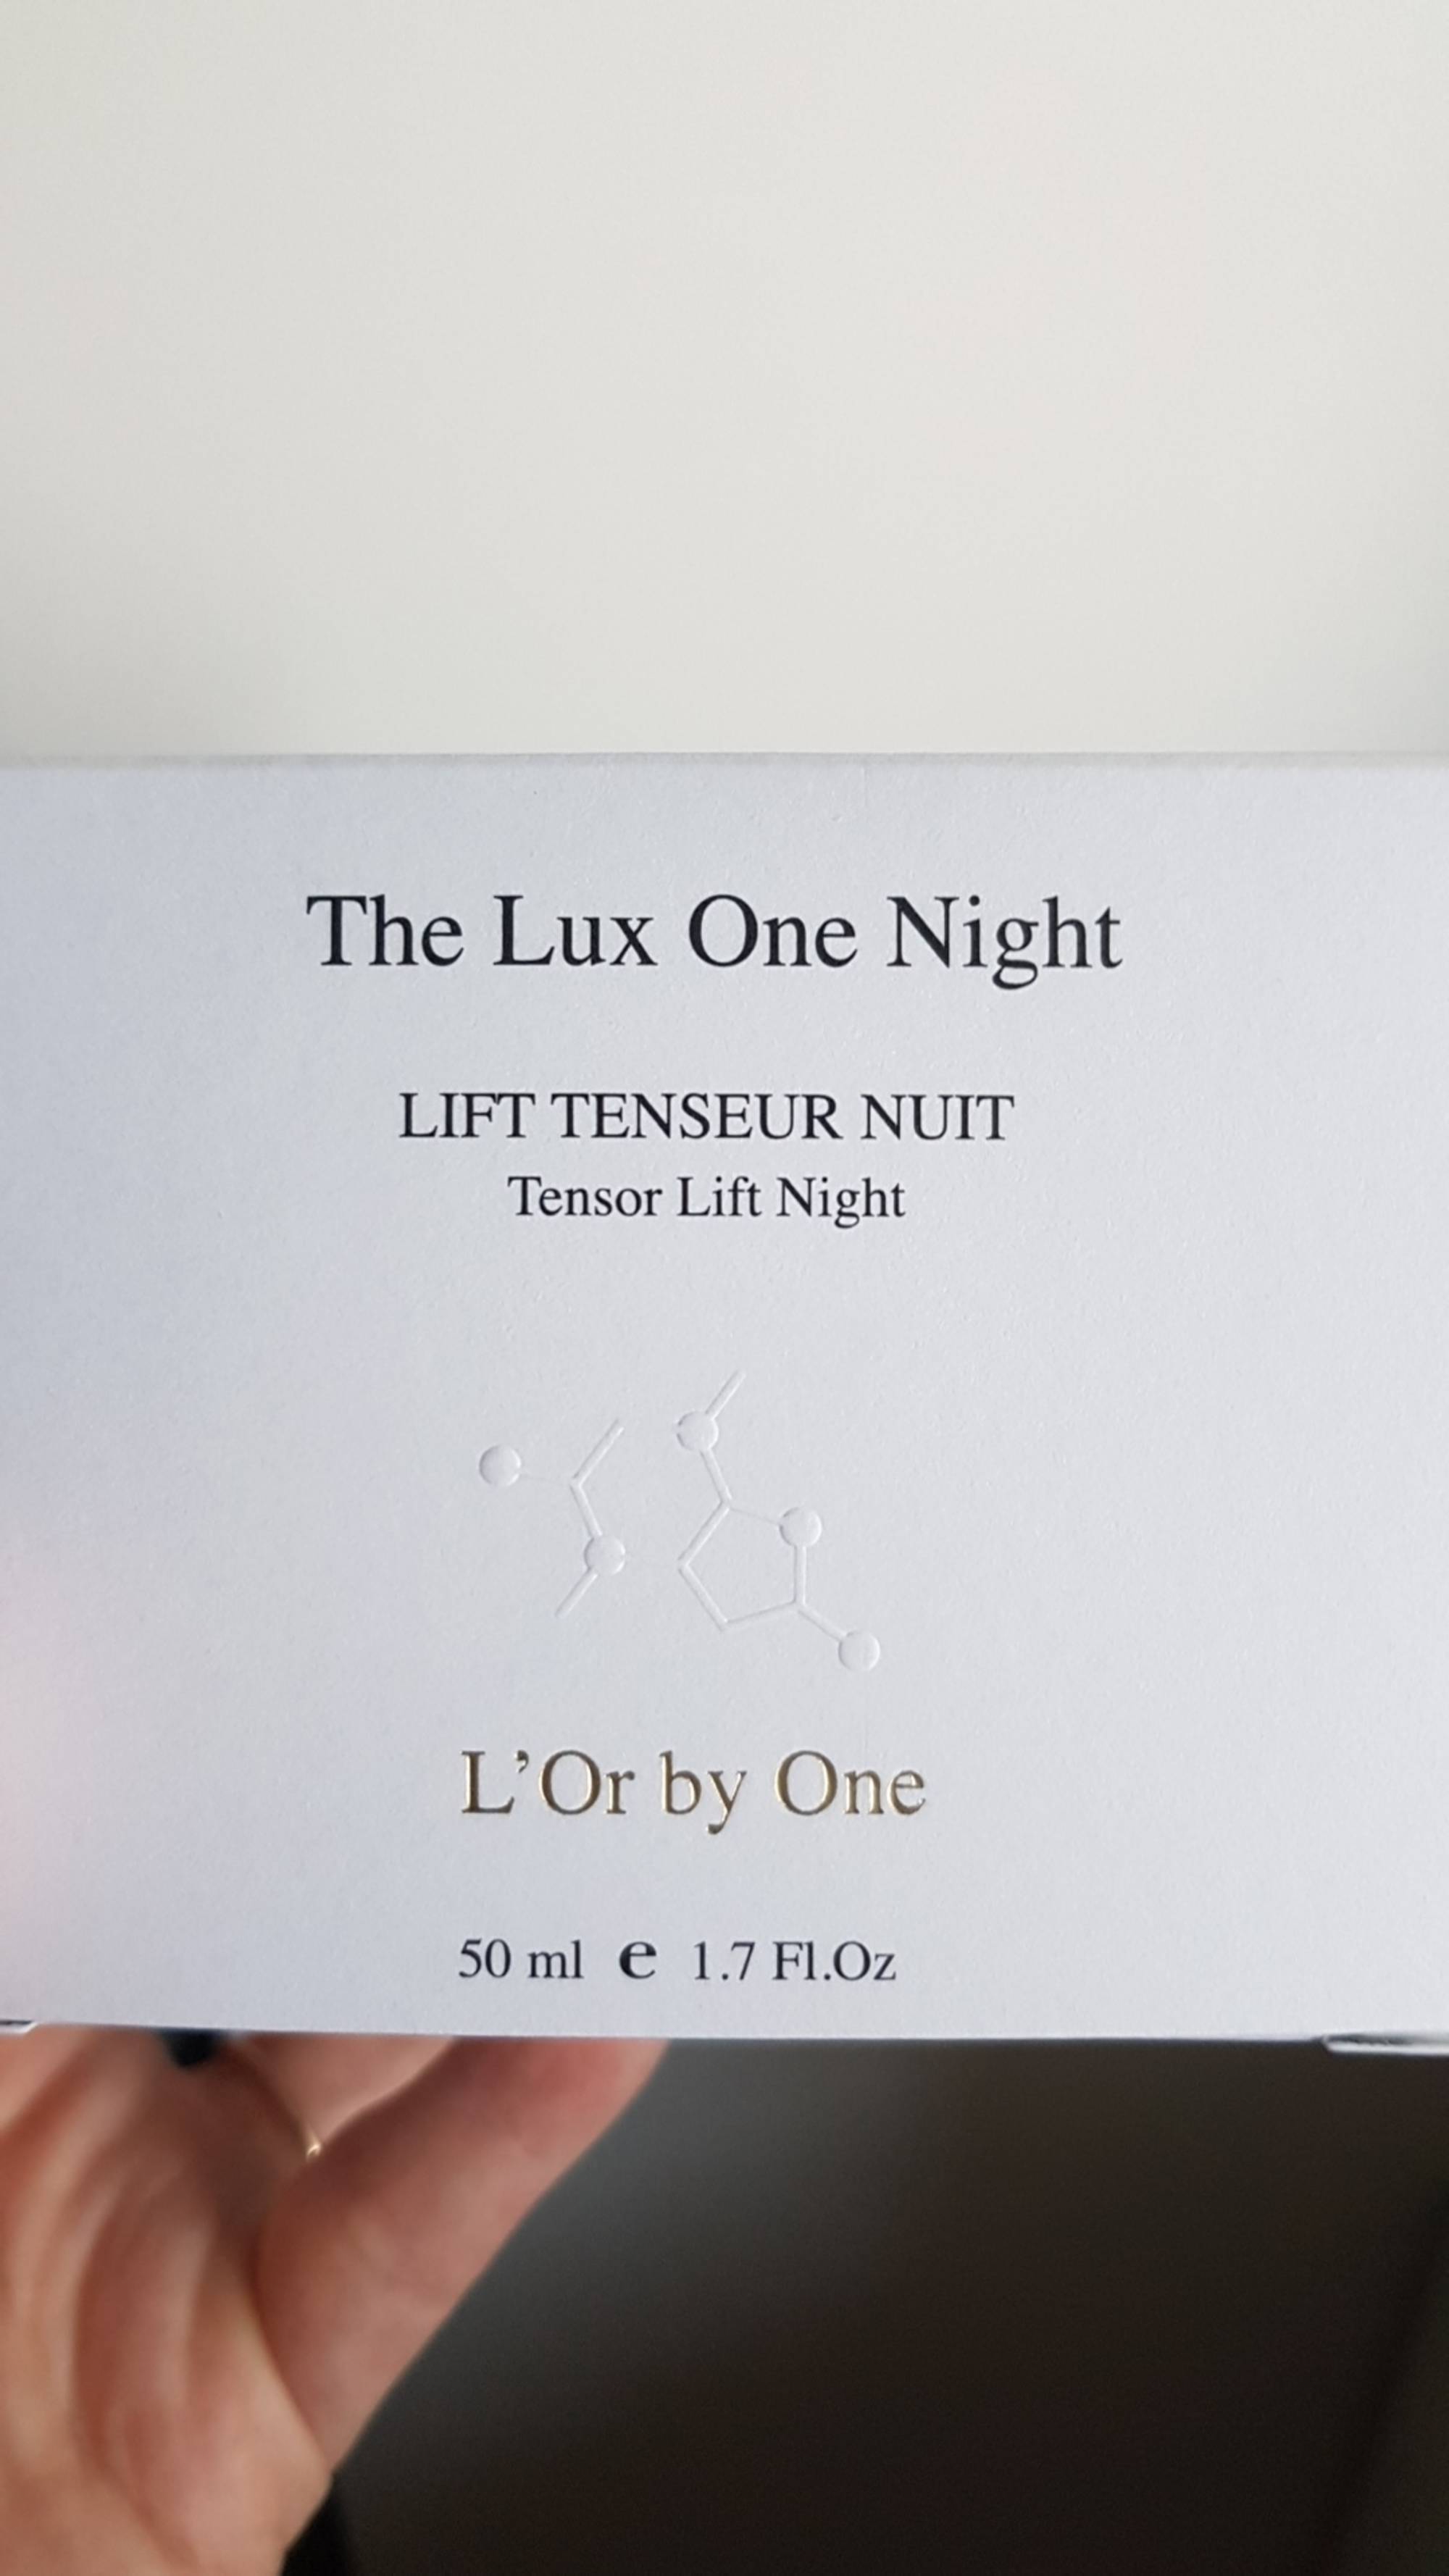 L'OR BY ONE - The lux one night